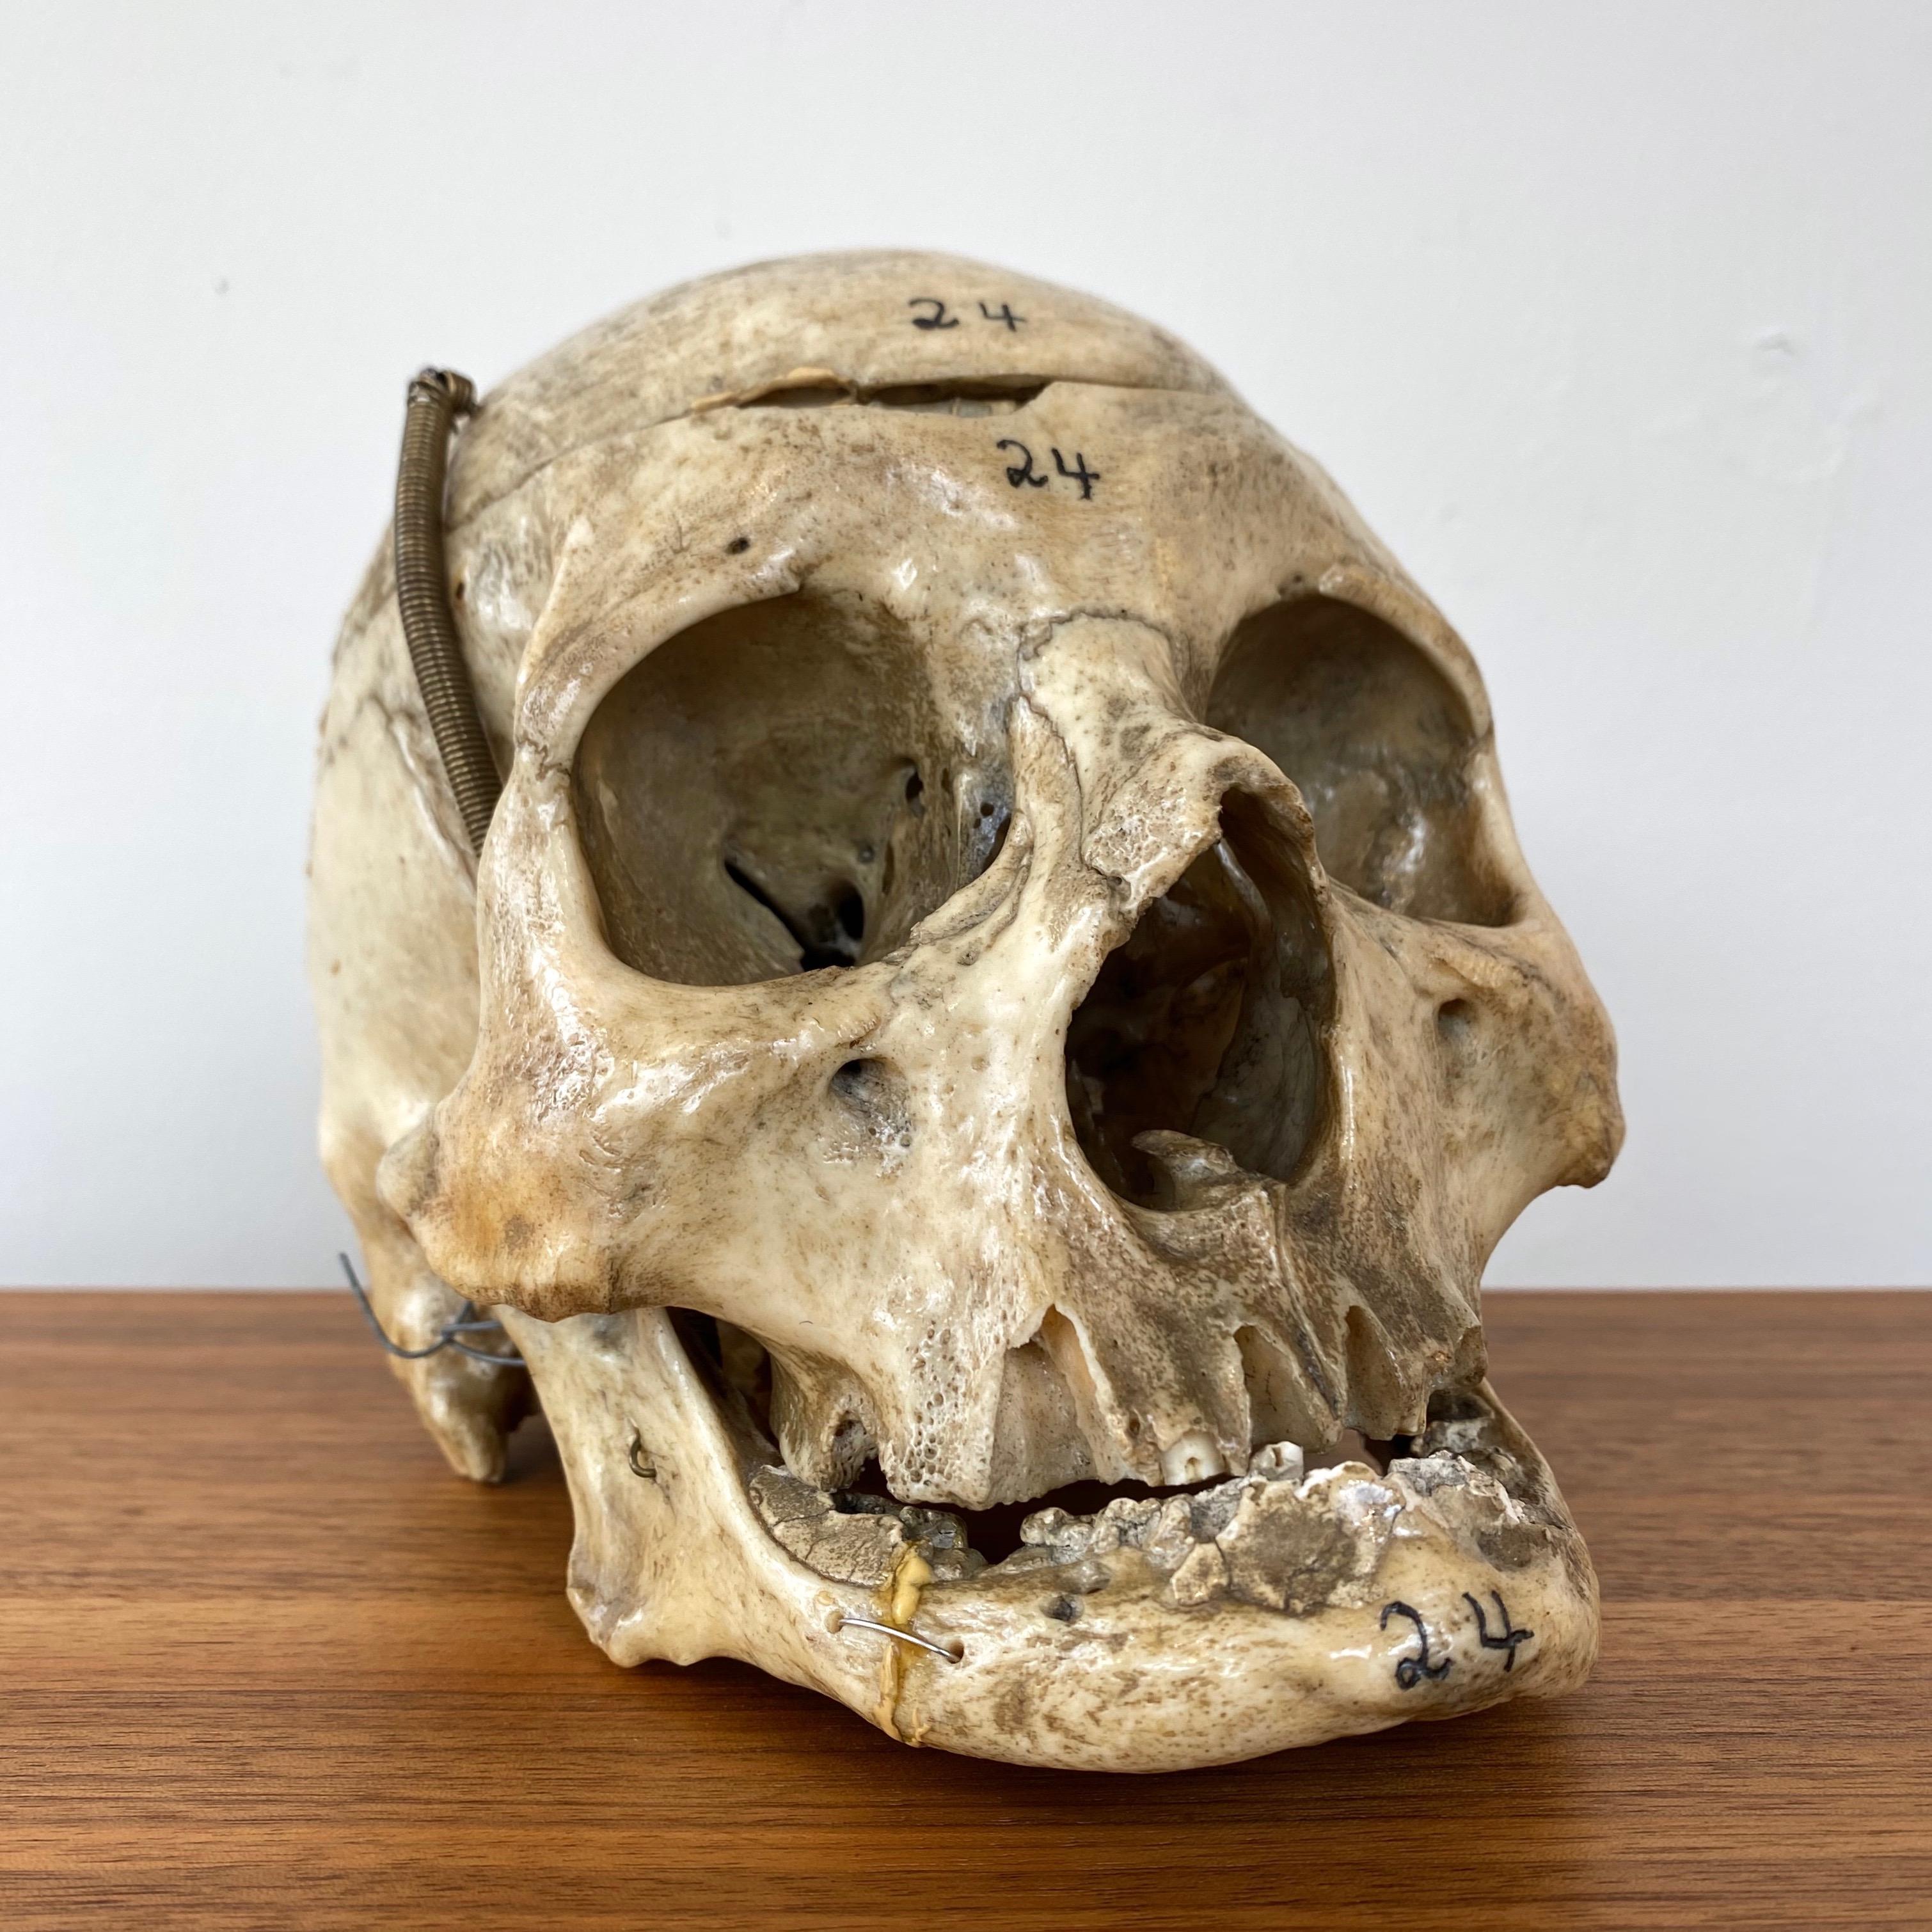 Early 20th Century Antique Articulated Human Skull, Medical Teaching Specimen, 1920